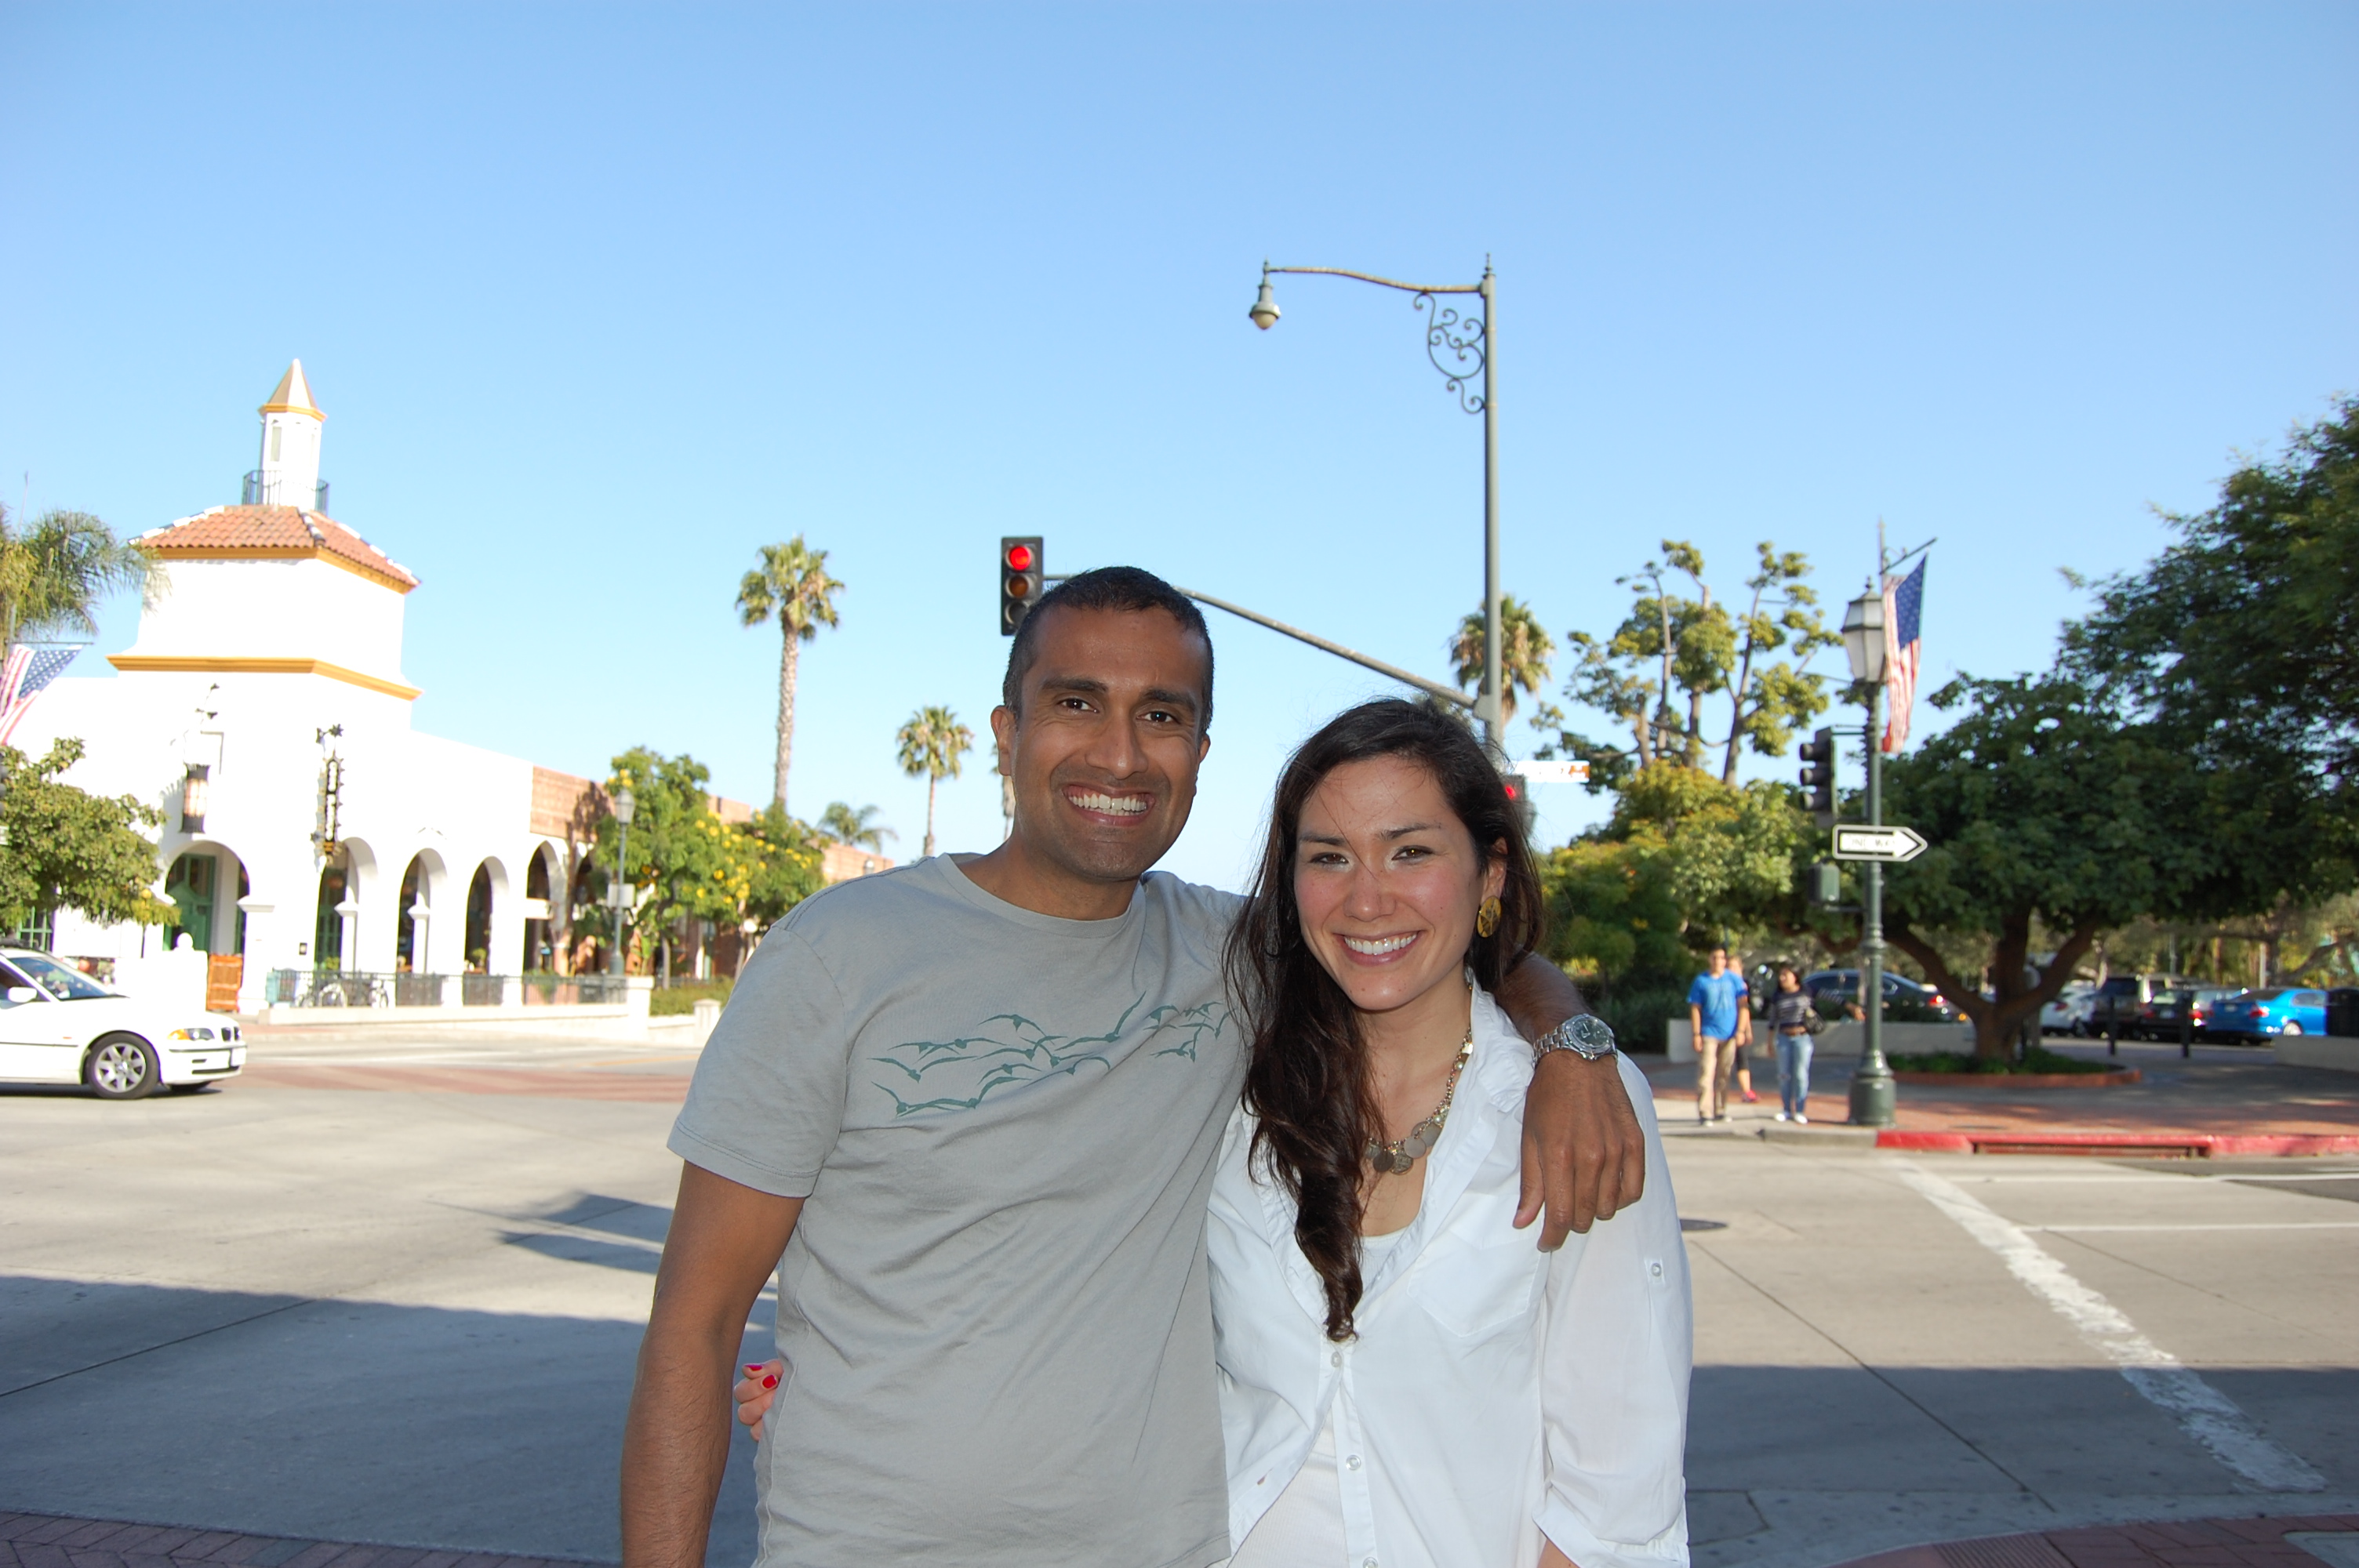 Also from around Santa Barbara, years ago - posing in front of stoplights and palms, hoping perhaps to grab a shot of Oprah strolling the town square with Stedman in the back.